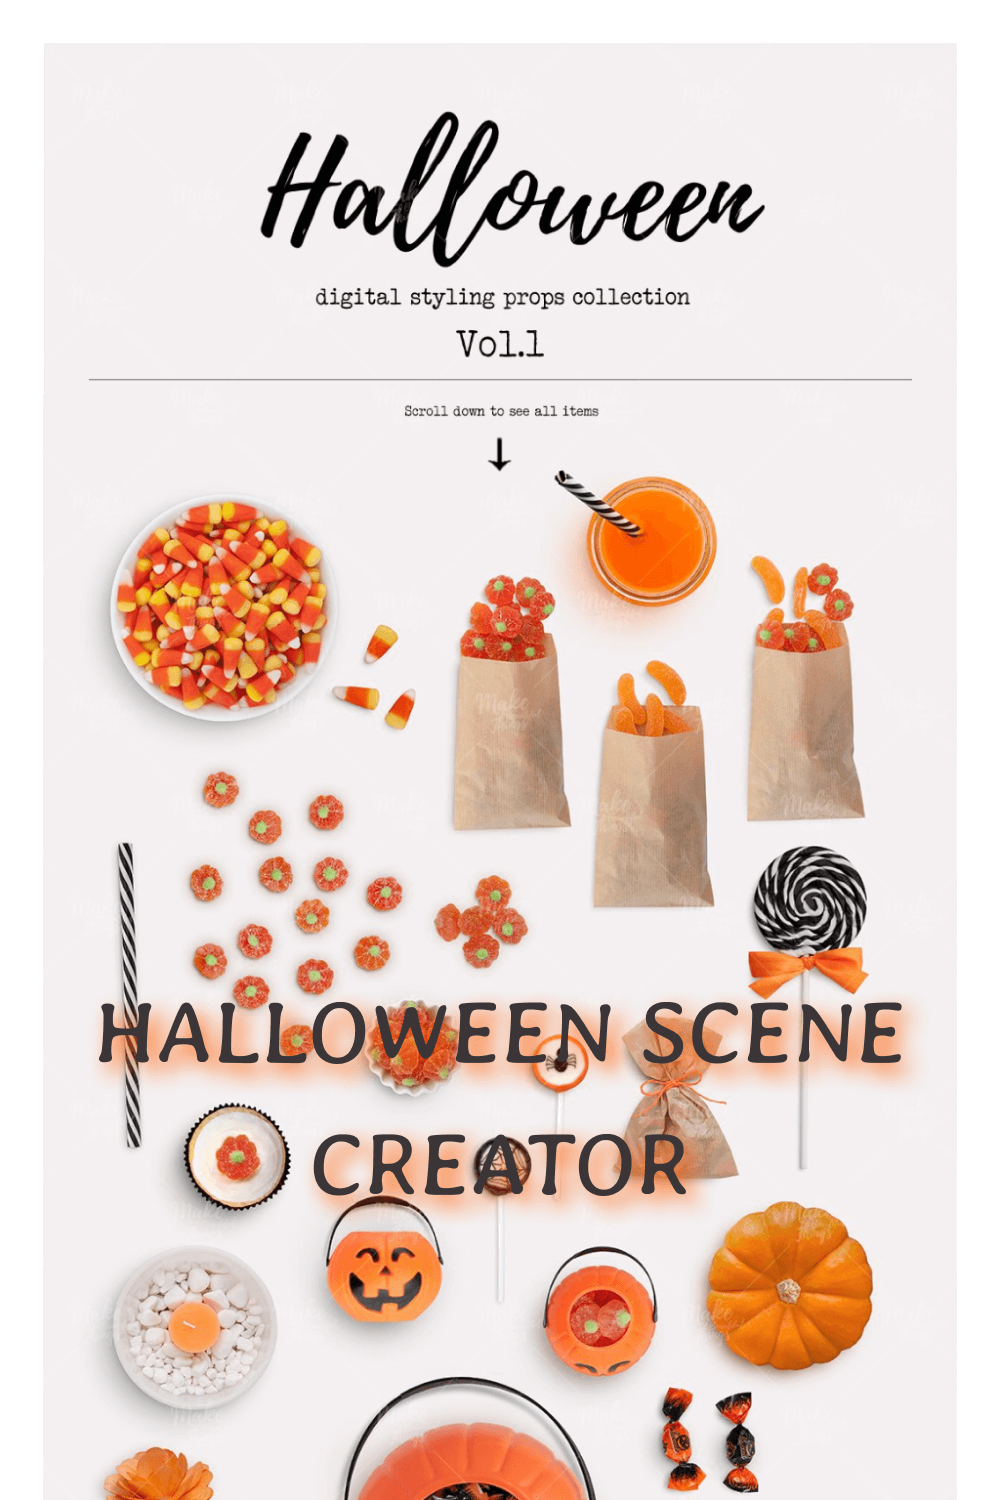 Halloween digital styling props collection. Vo1.1. Scroll down.